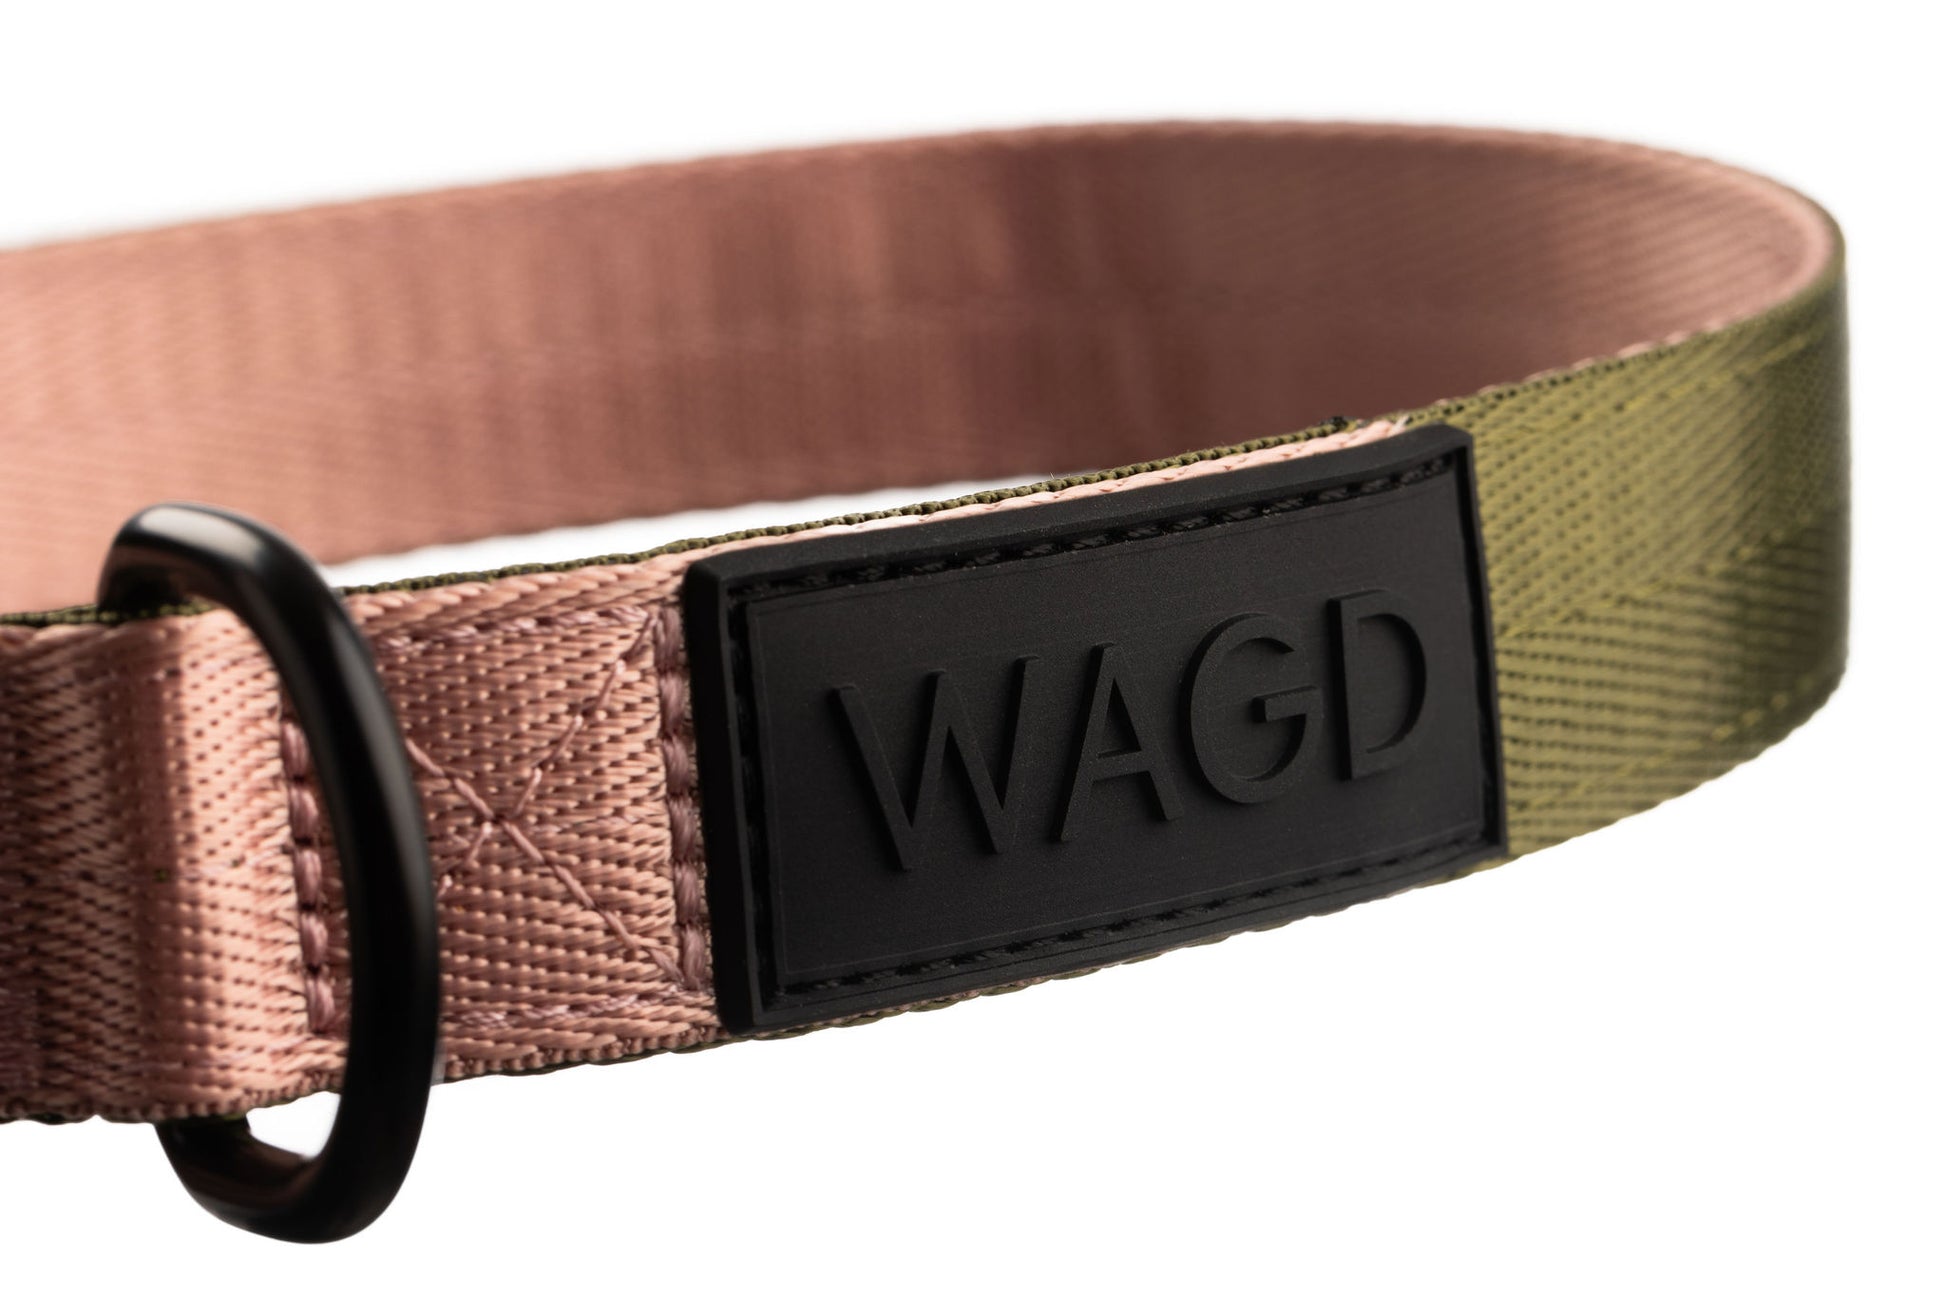 Close up of dog collar logo. Black rubber with raised black letters WAGD.